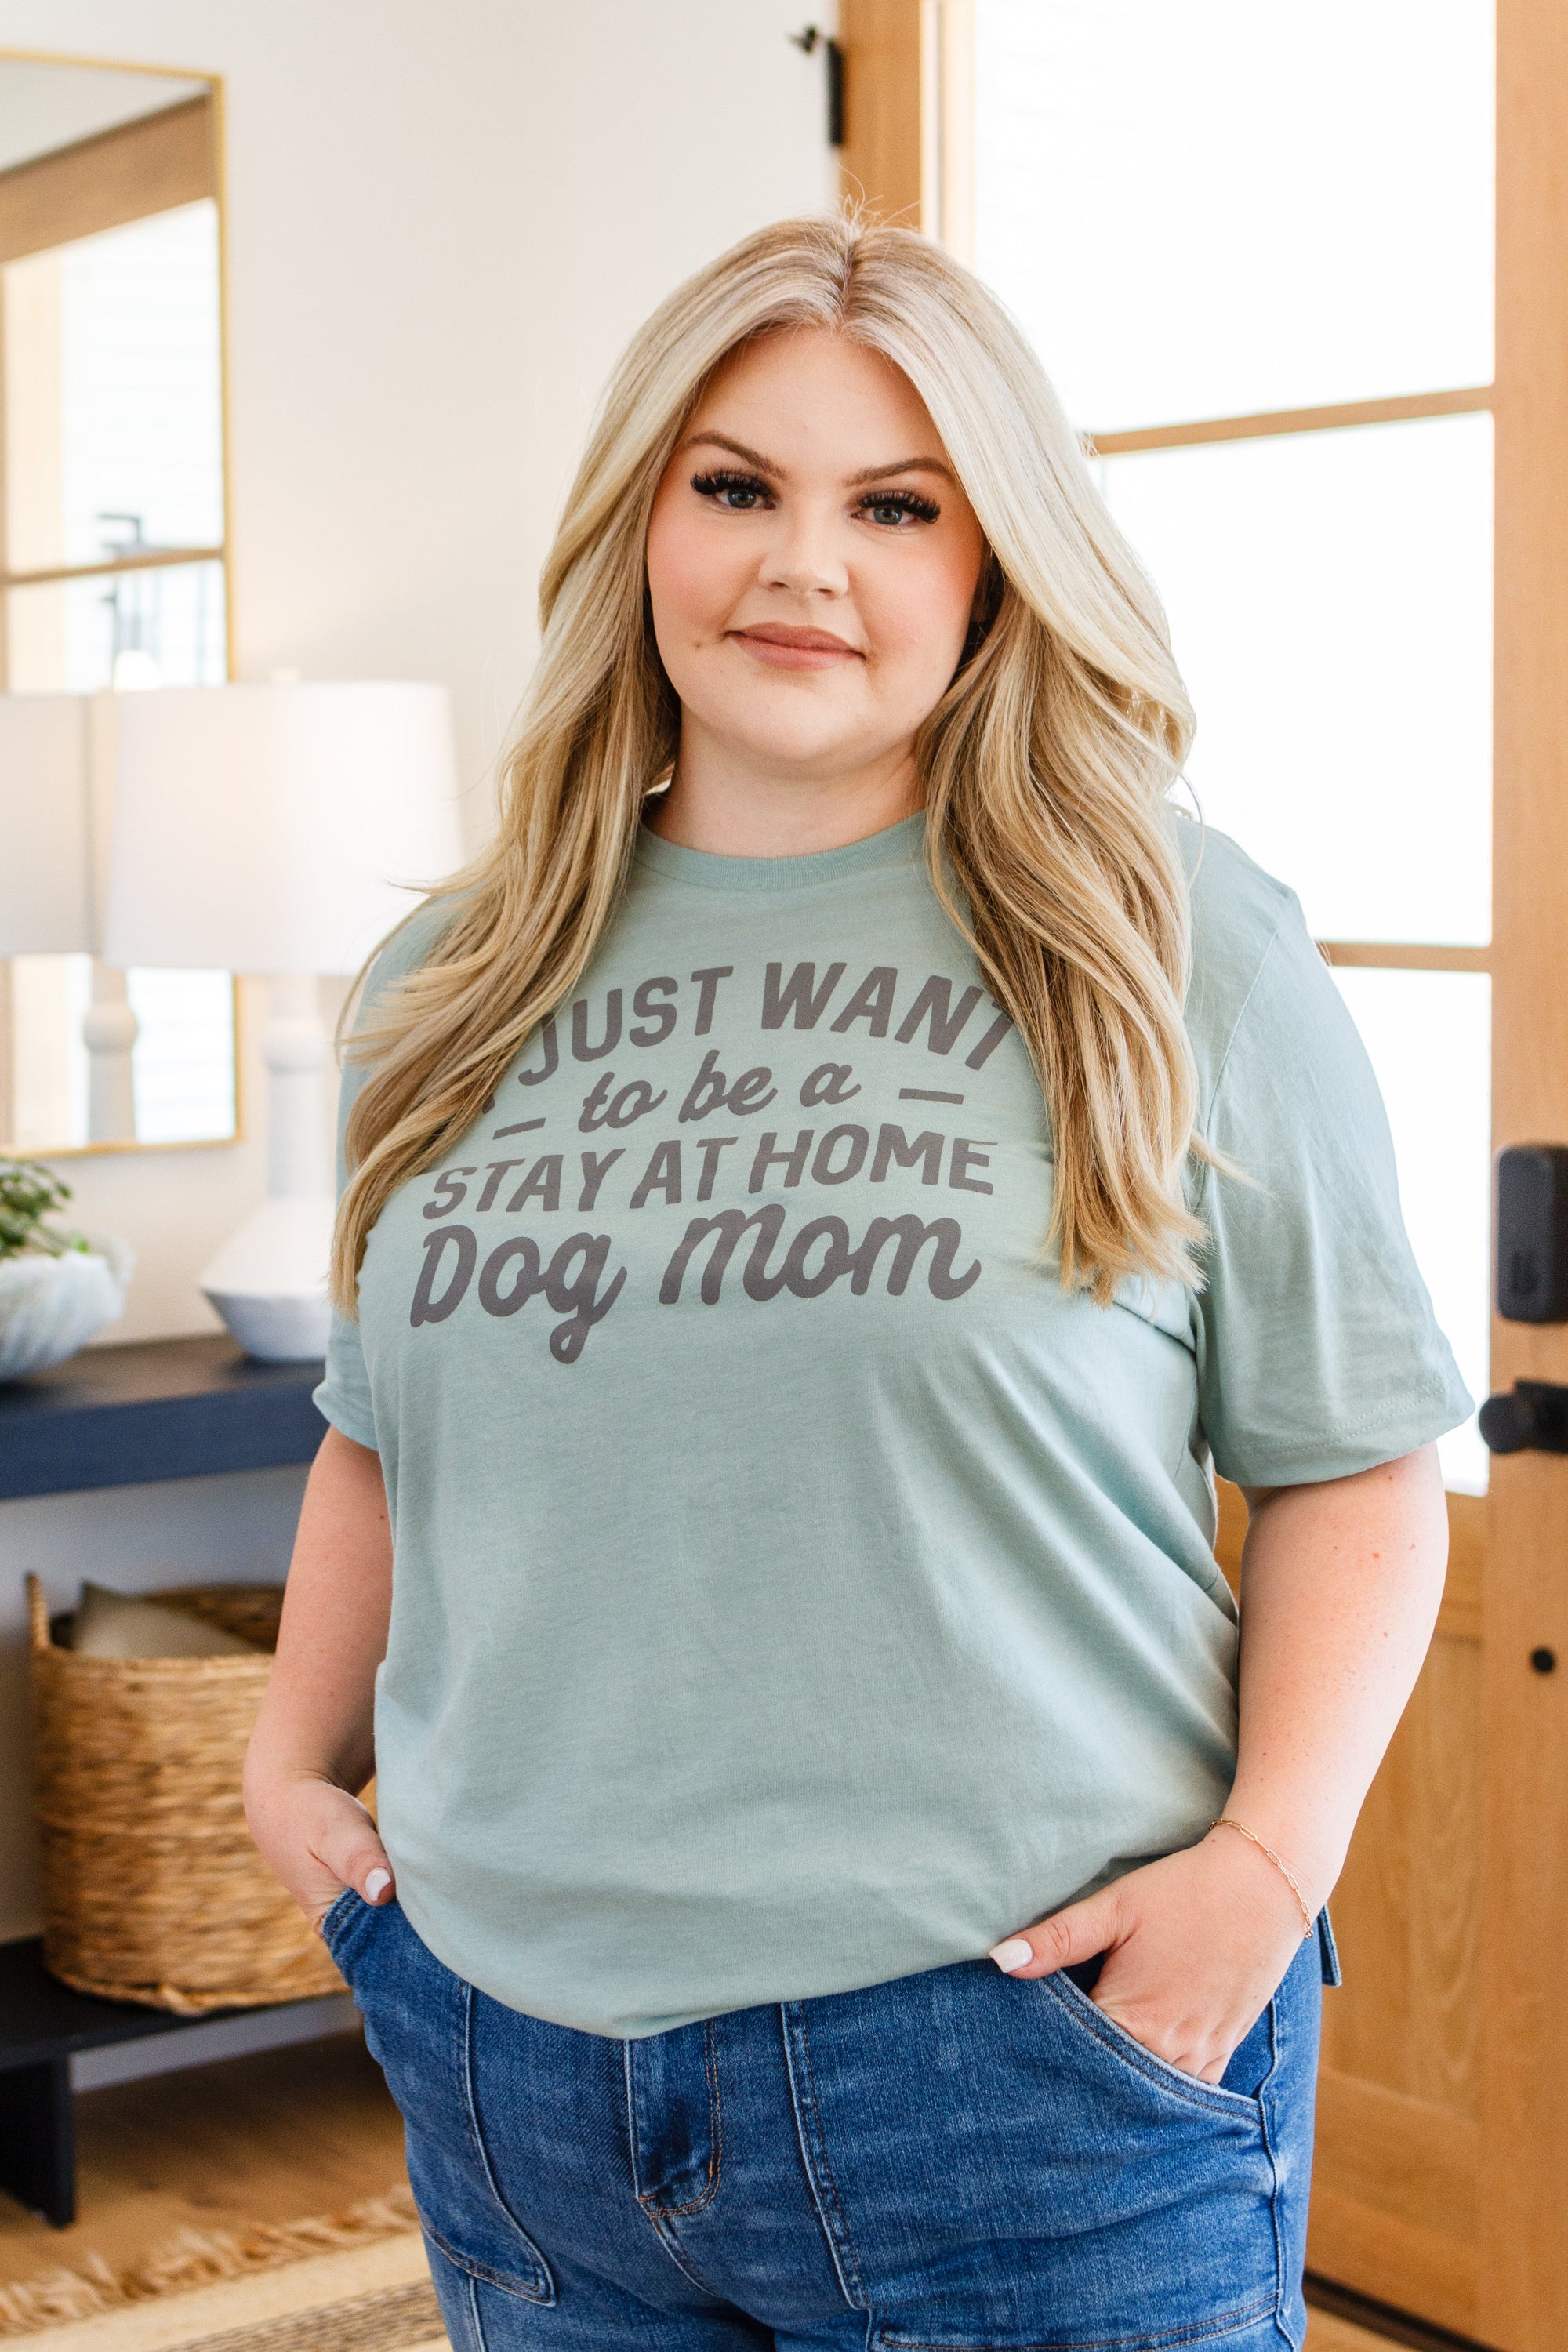 Stay At Home Dog Mom Graphic Tee-Womens-mercuryfoodservice Shop for Women & Kids